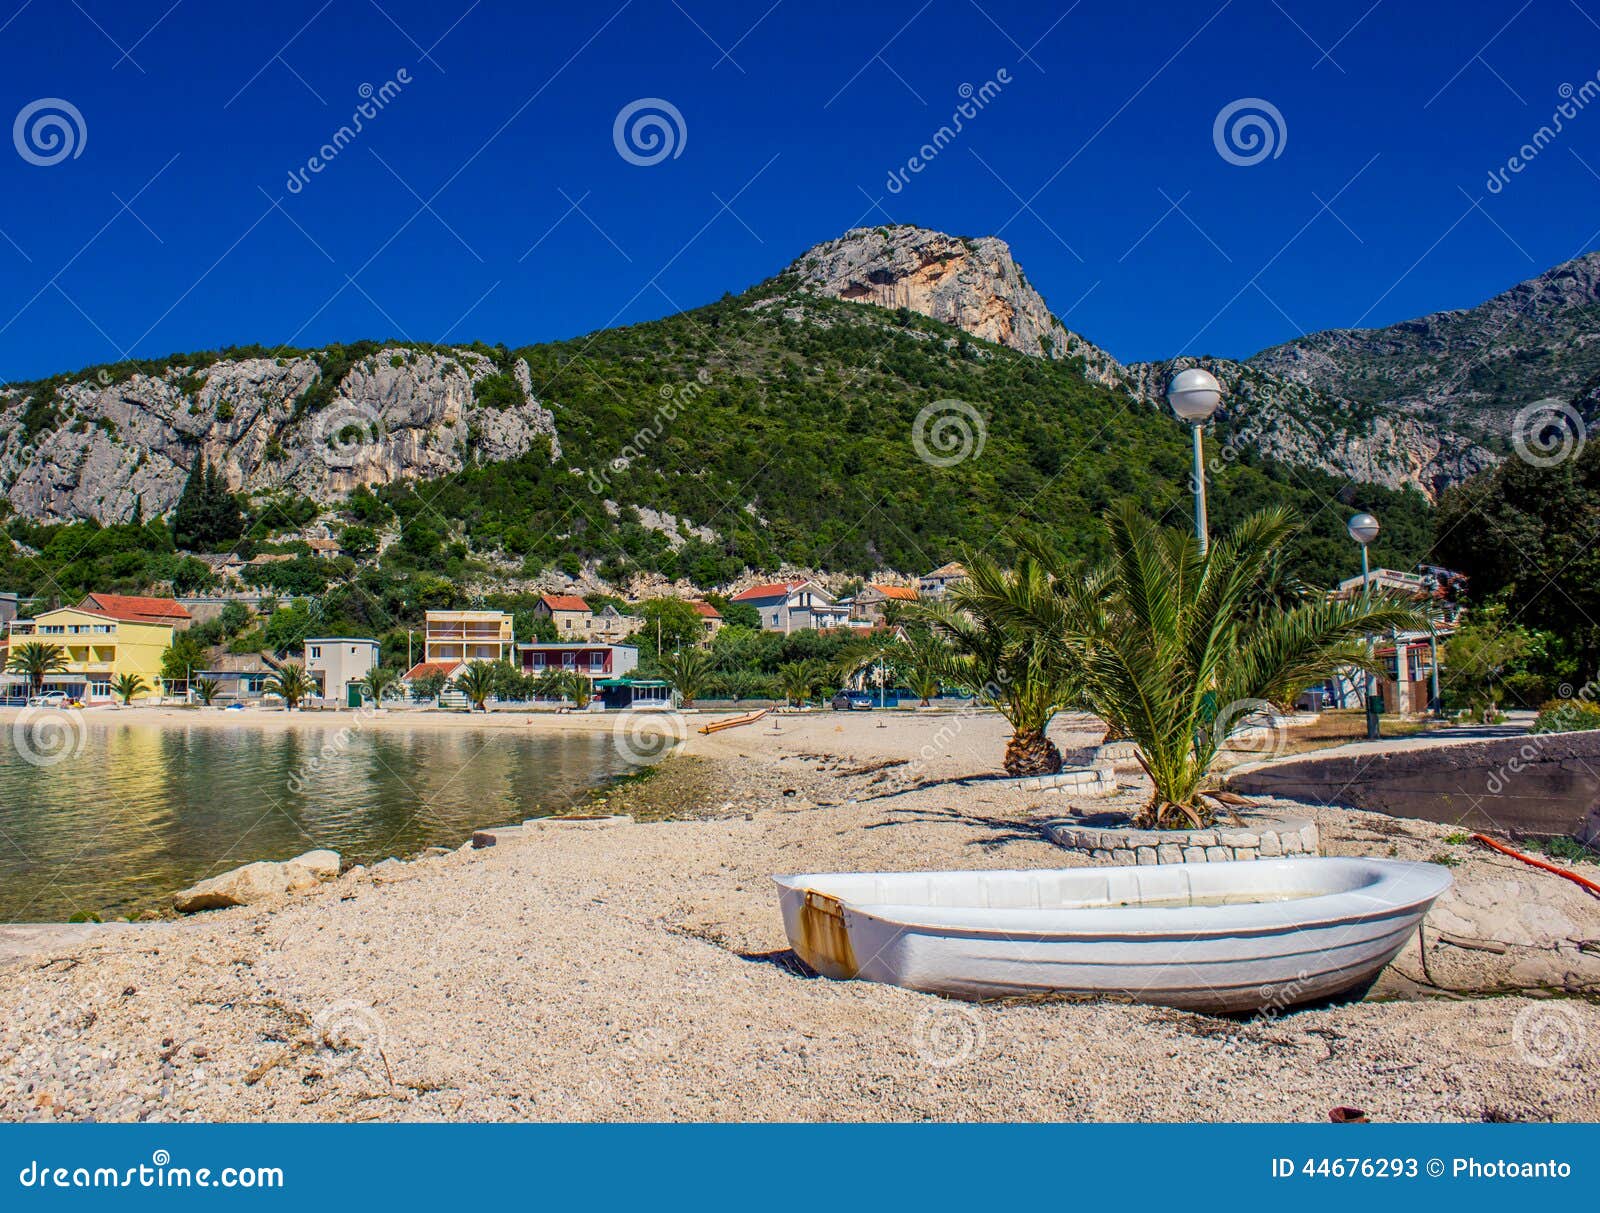 Small boat on a beach with houses and mountain in the background